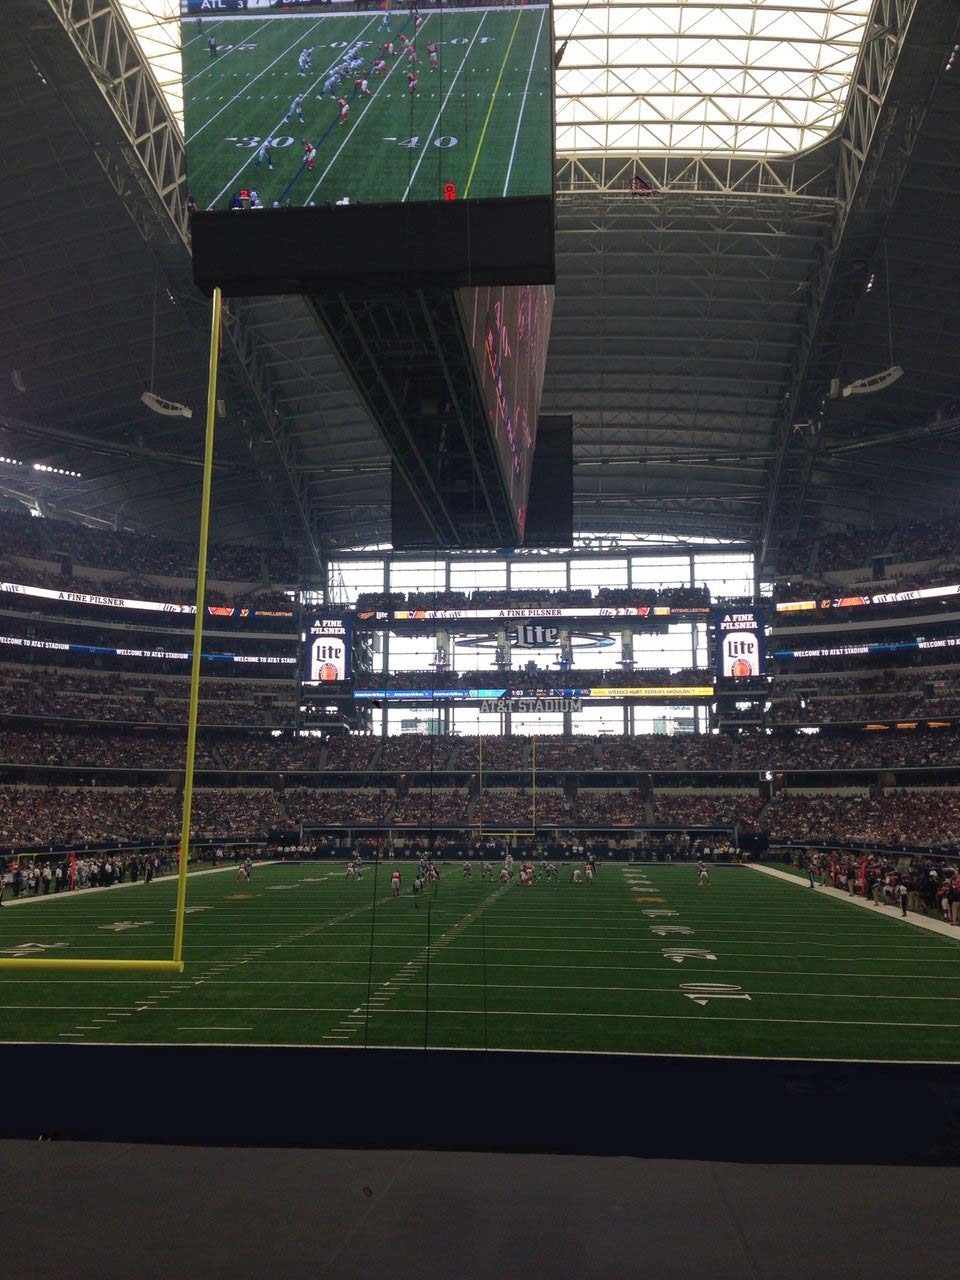 section 147, row 8 seat view  for football - at&t stadium (cowboys stadium)